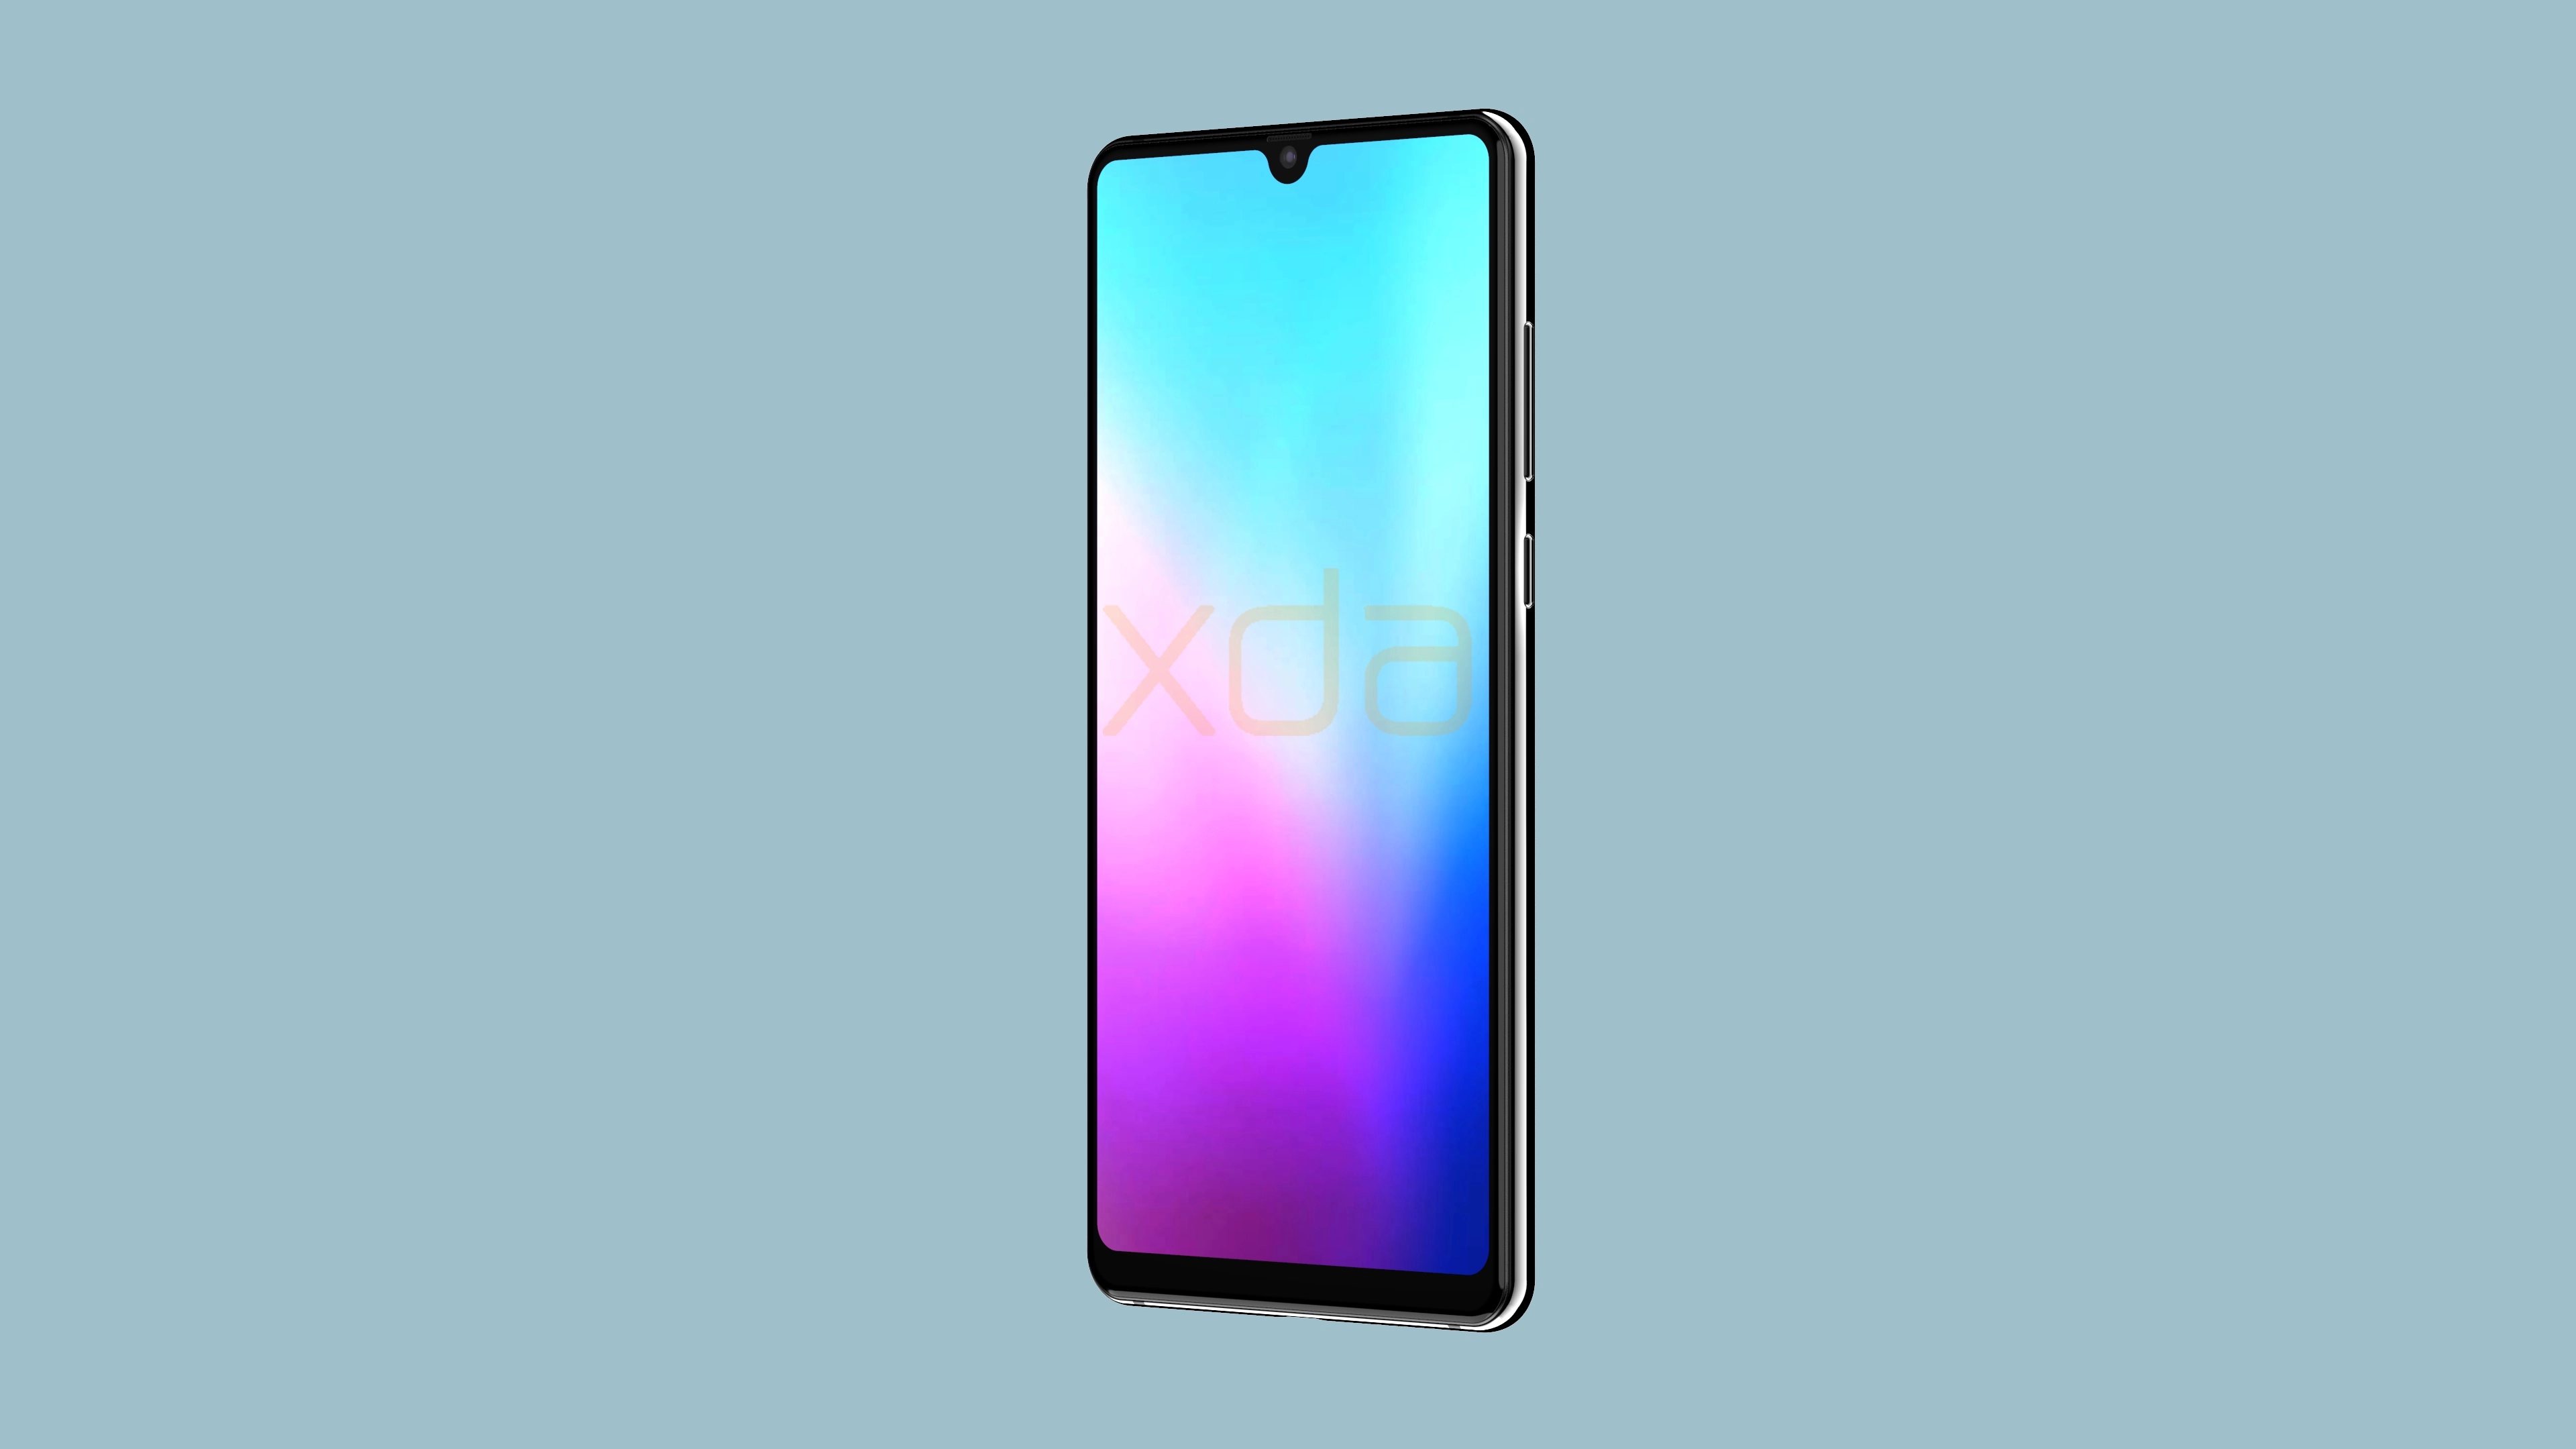 A leaked render of the HUAWEI Mate 20.